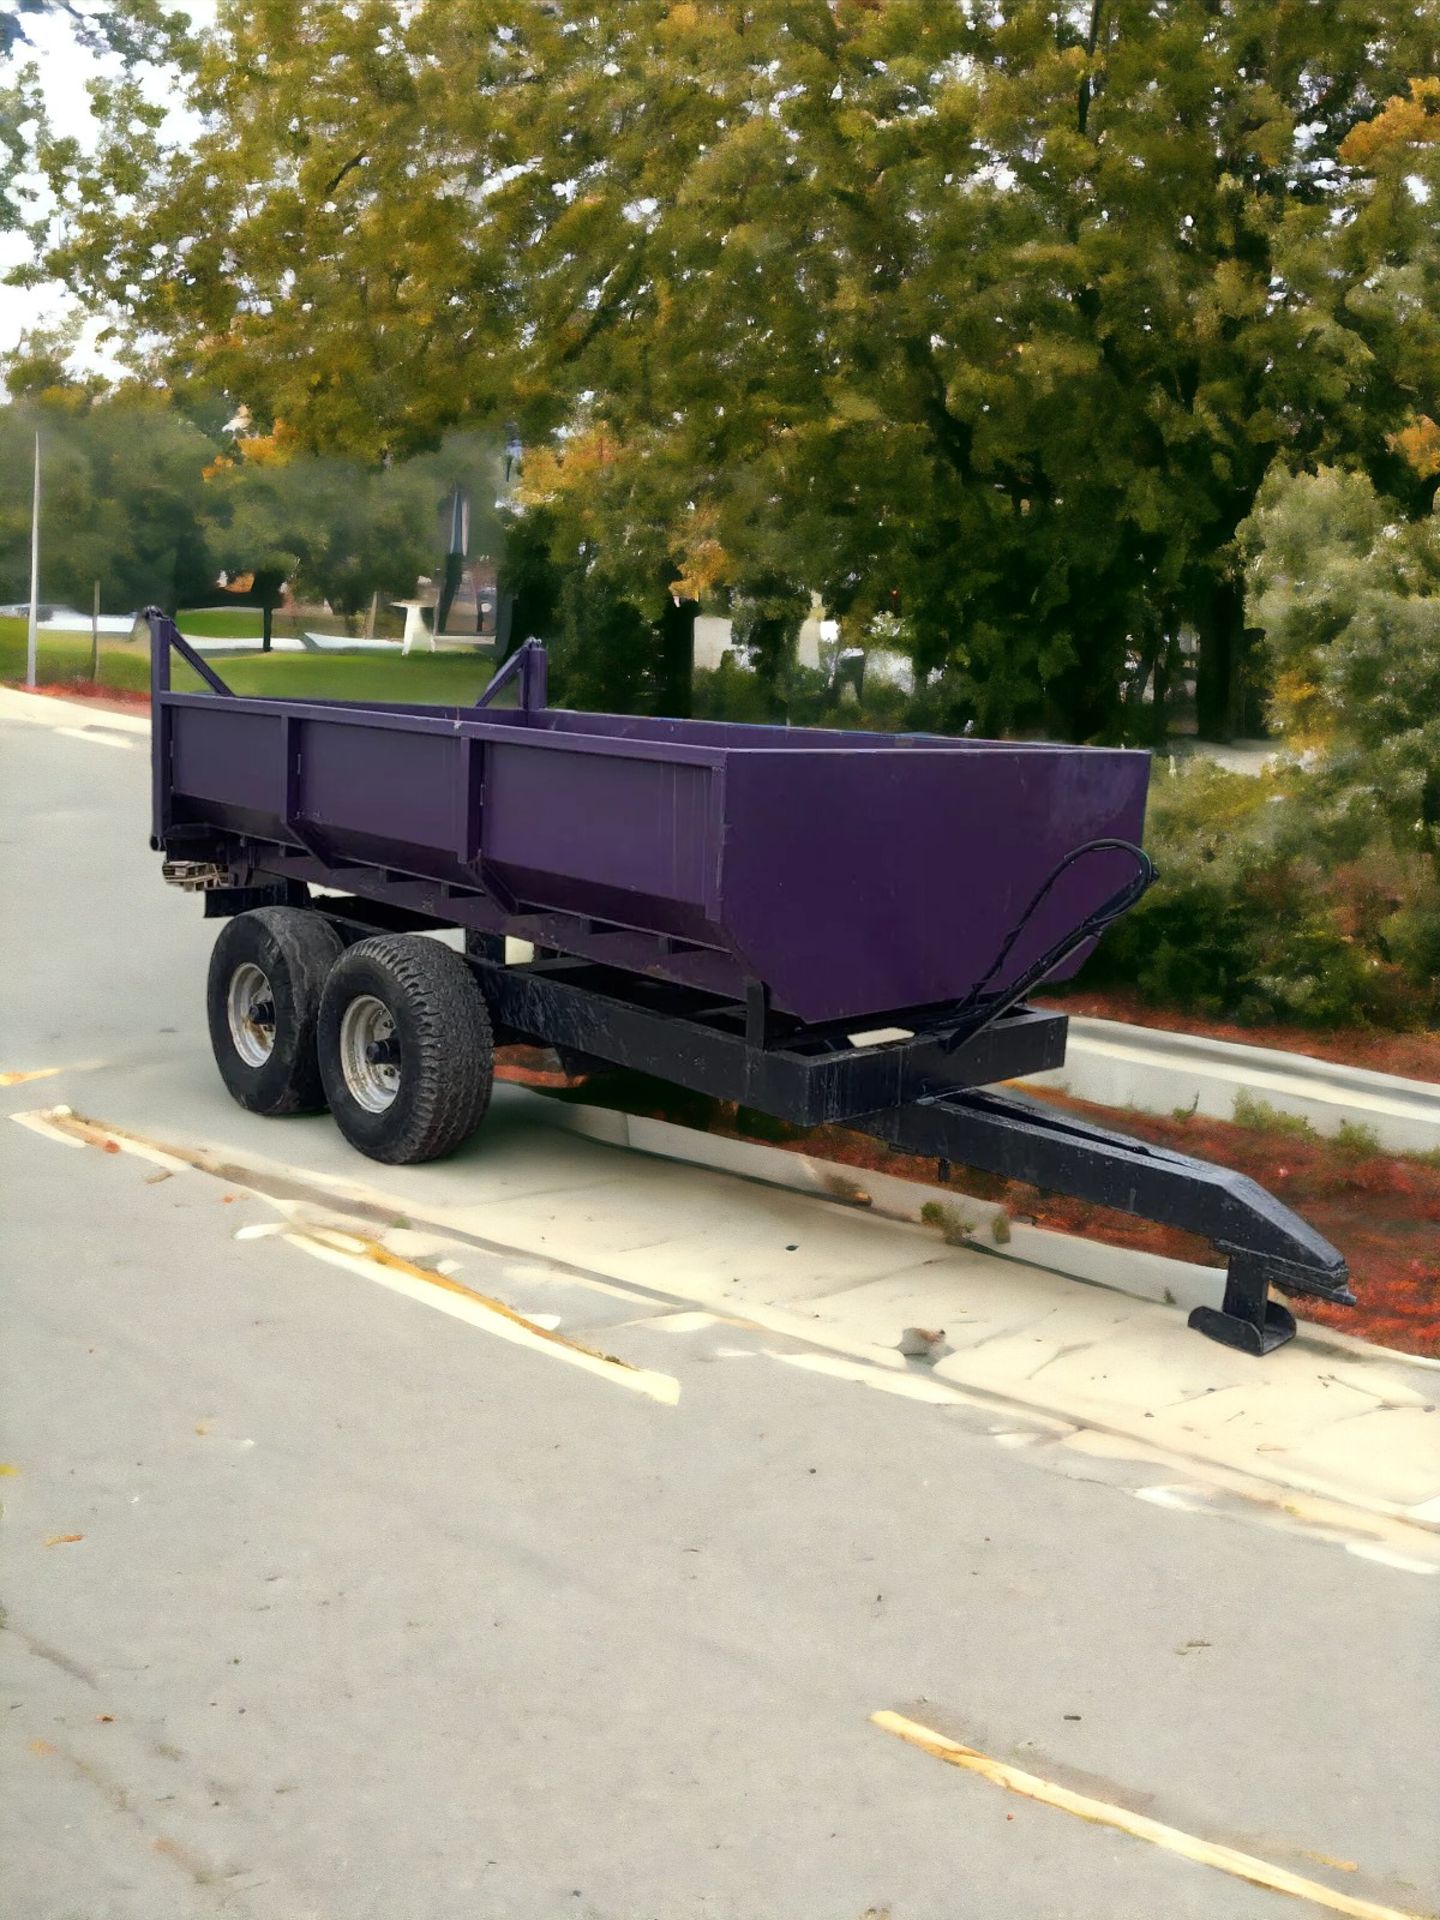 HEAVY-DUTY 8 TON TRAILER FOR ALL YOUR TRANSPORT NEEDS